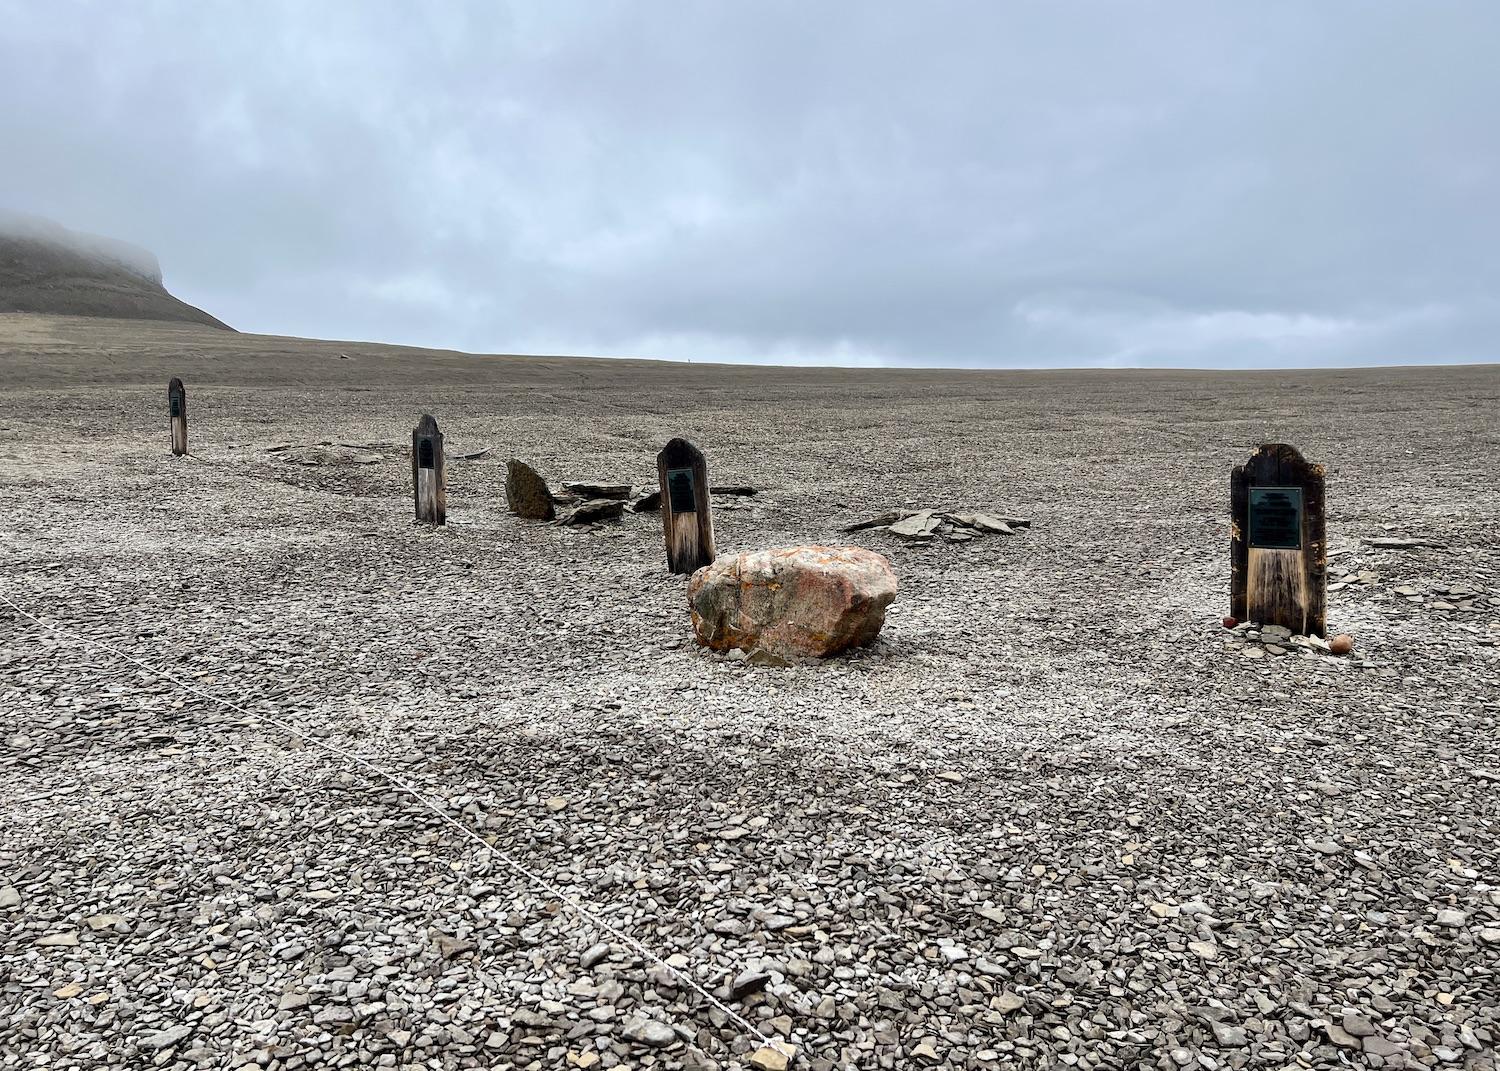 For our Beechey Island visit, Adventure Canada laid down rope to keep us about 10 feet from the Franklin graves.